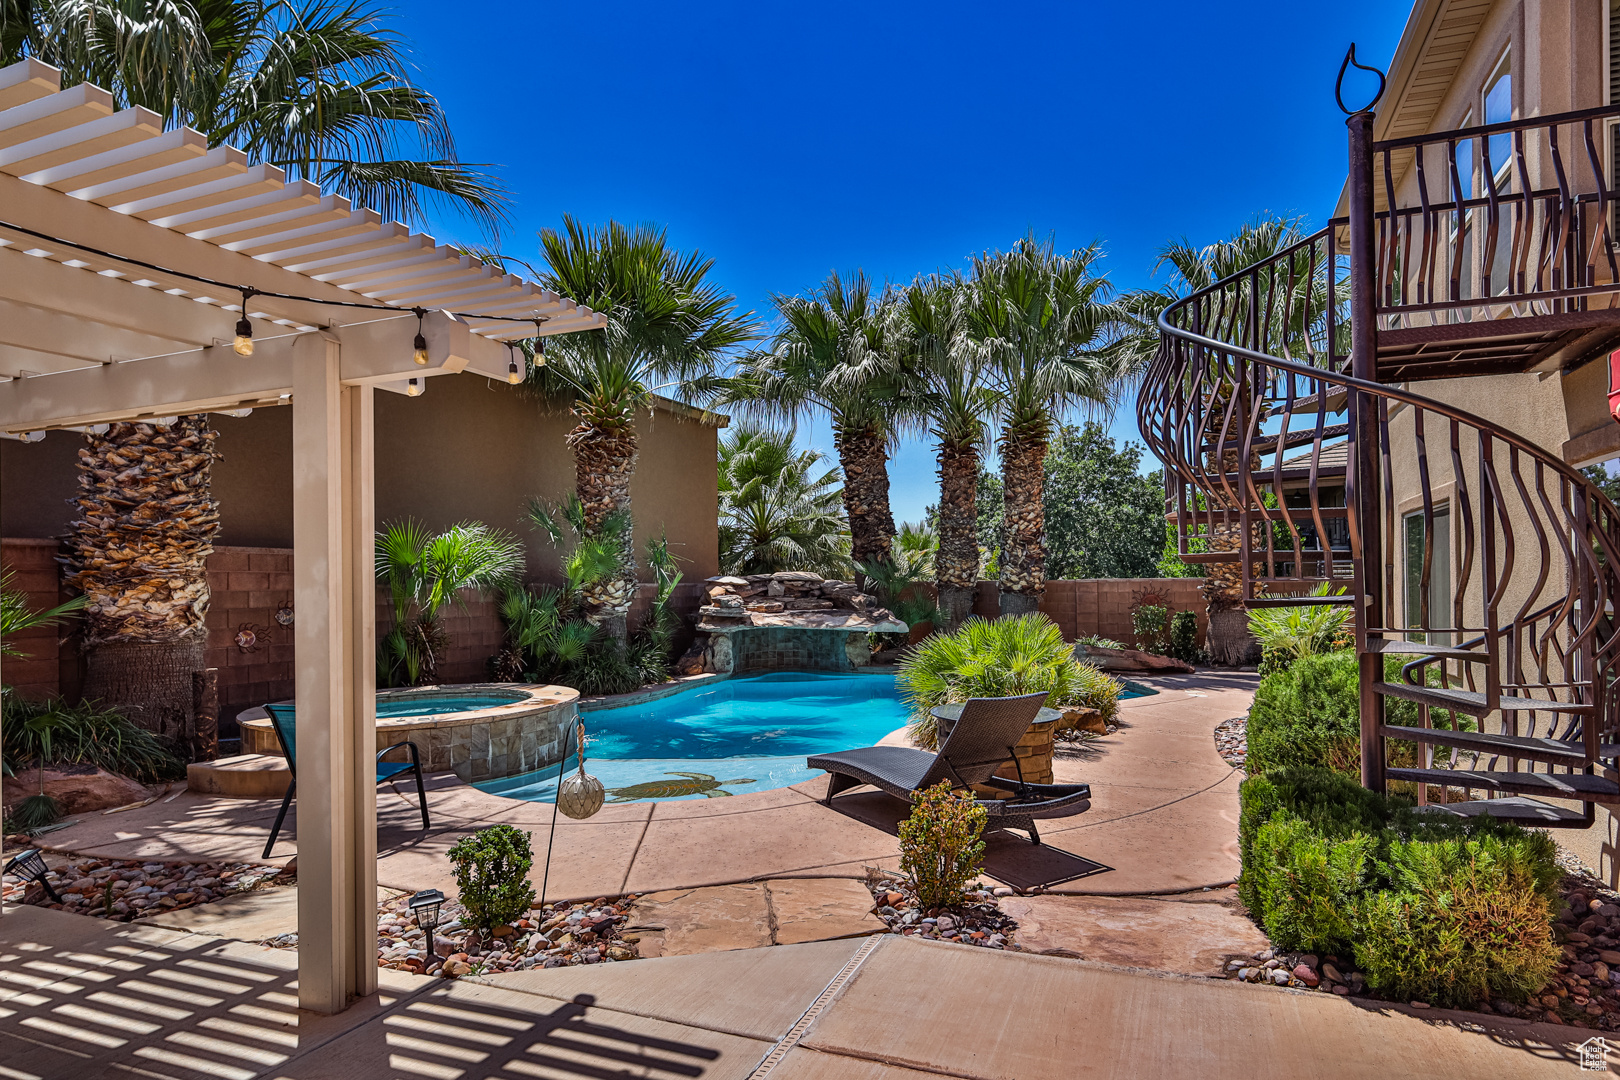 View of swimming pool featuring a pergola, an in ground hot tub, and a patio area